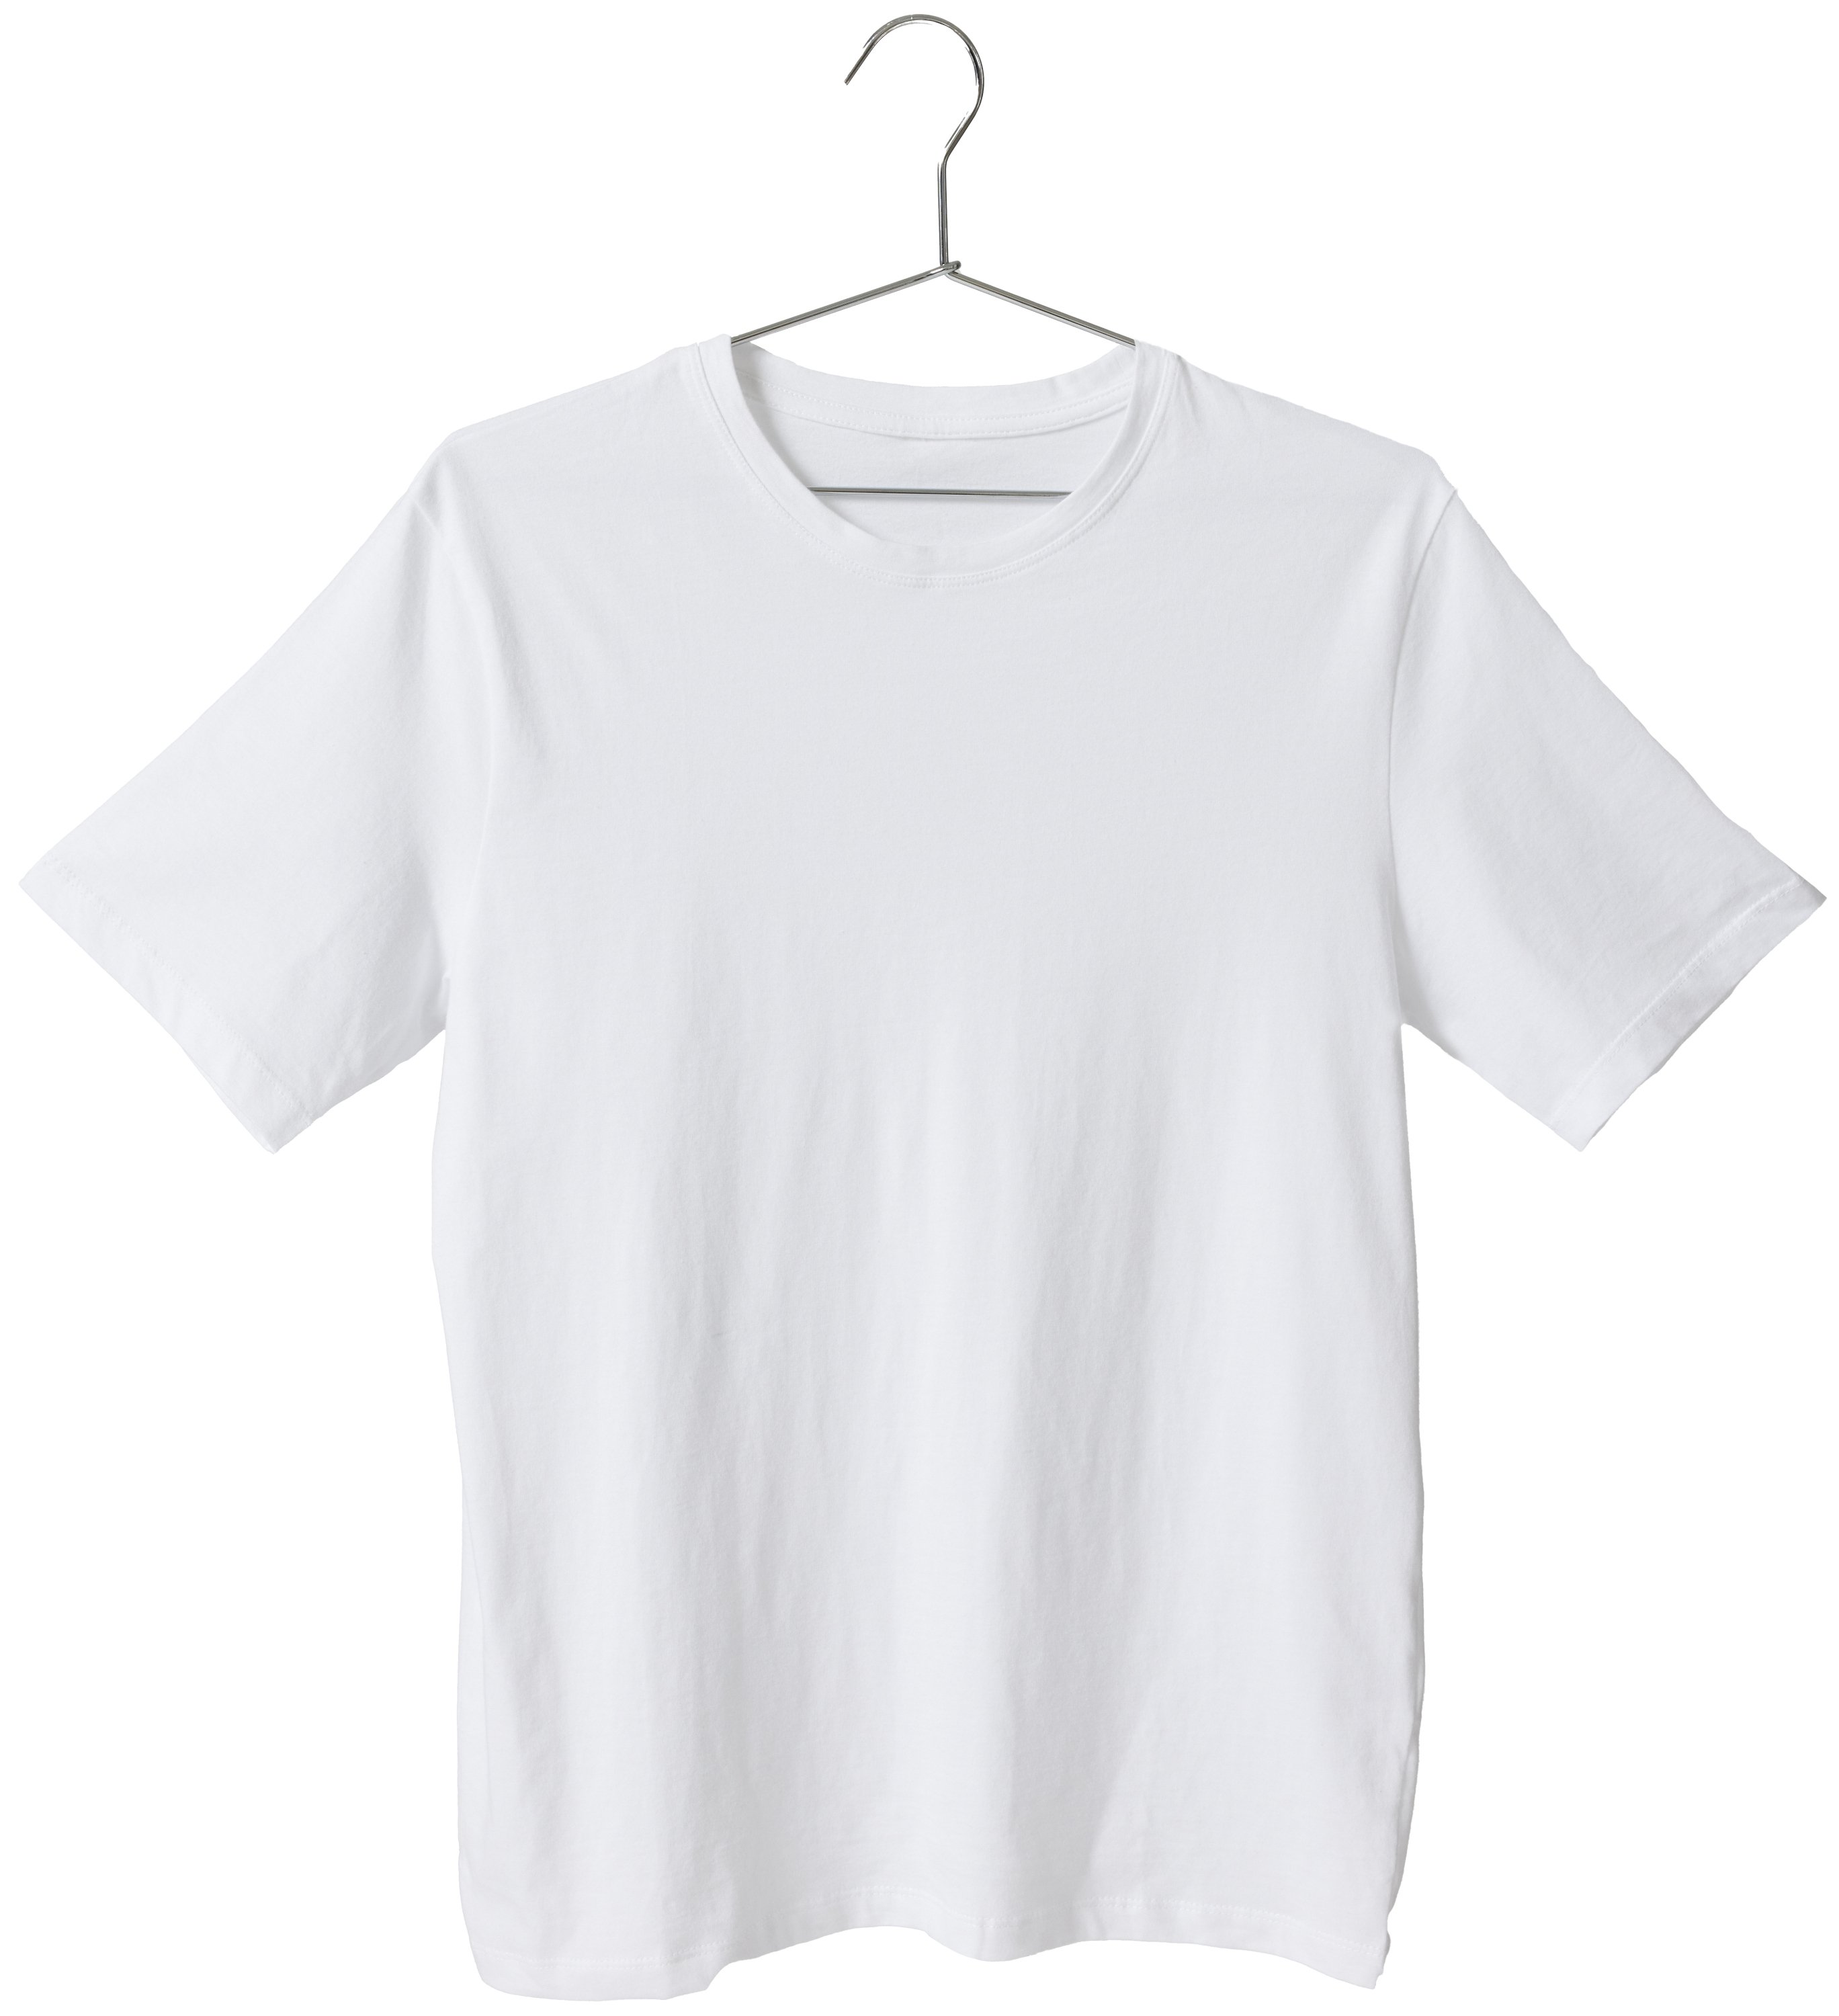 White Tshirt made of polyester